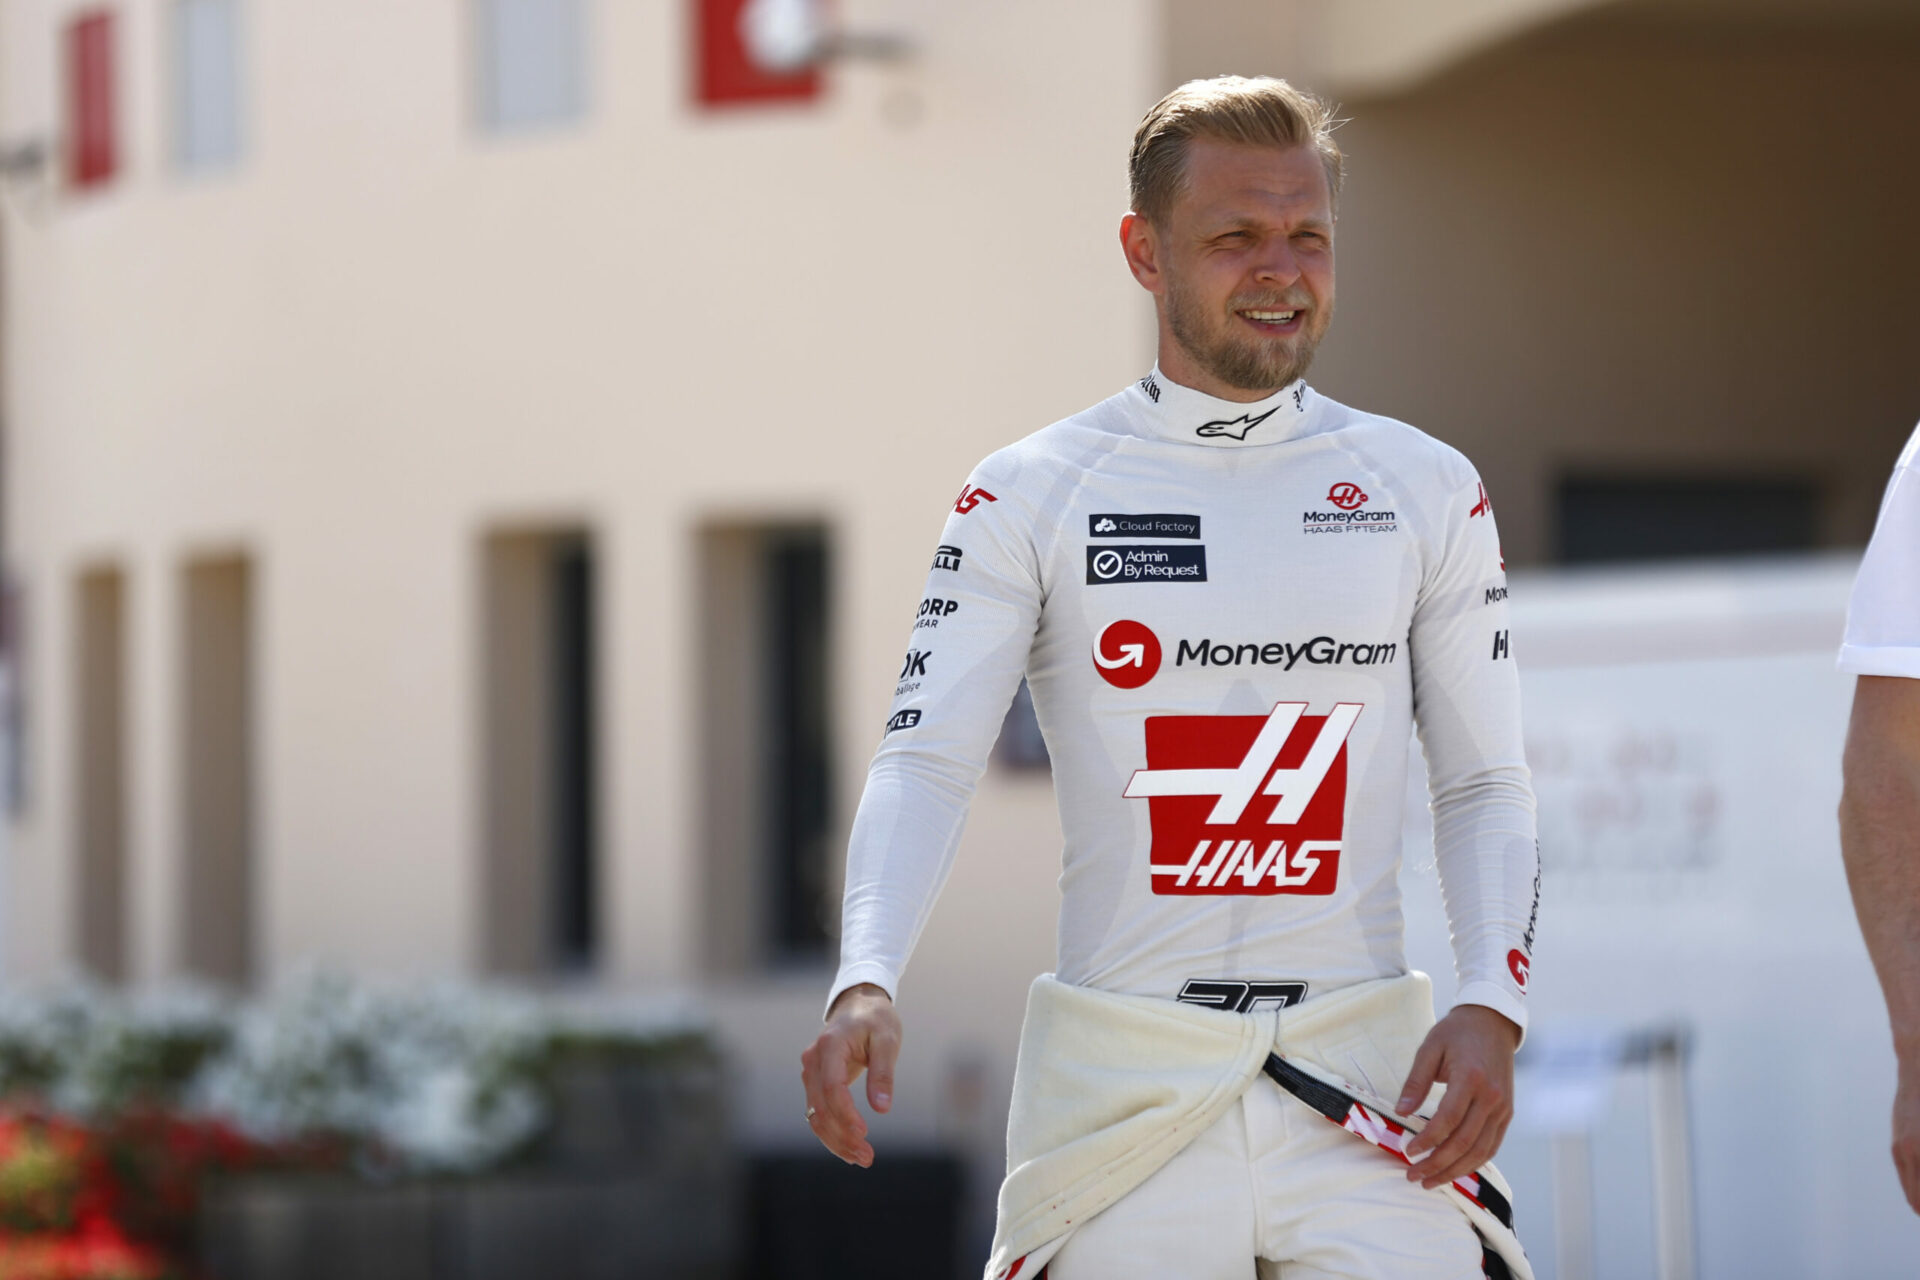 Kevin Magnussen Haas F1